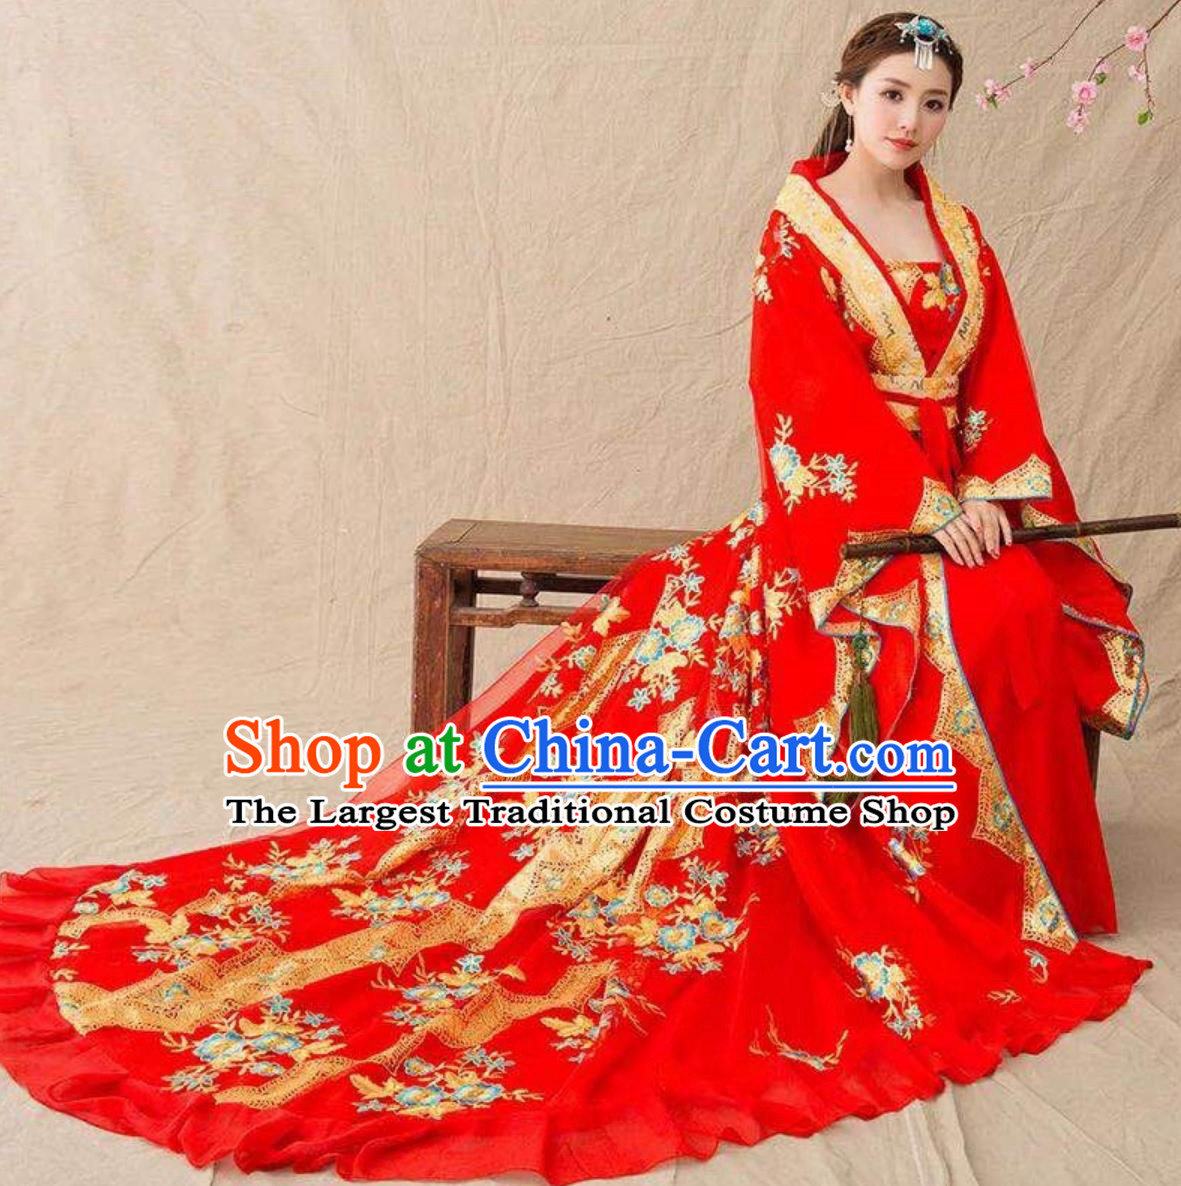 Red Dress Online Buy Traditional Hanfu Empress Clothing Ancient Chinese Tang Dynasty Imperial Concubine Long Tail Costume